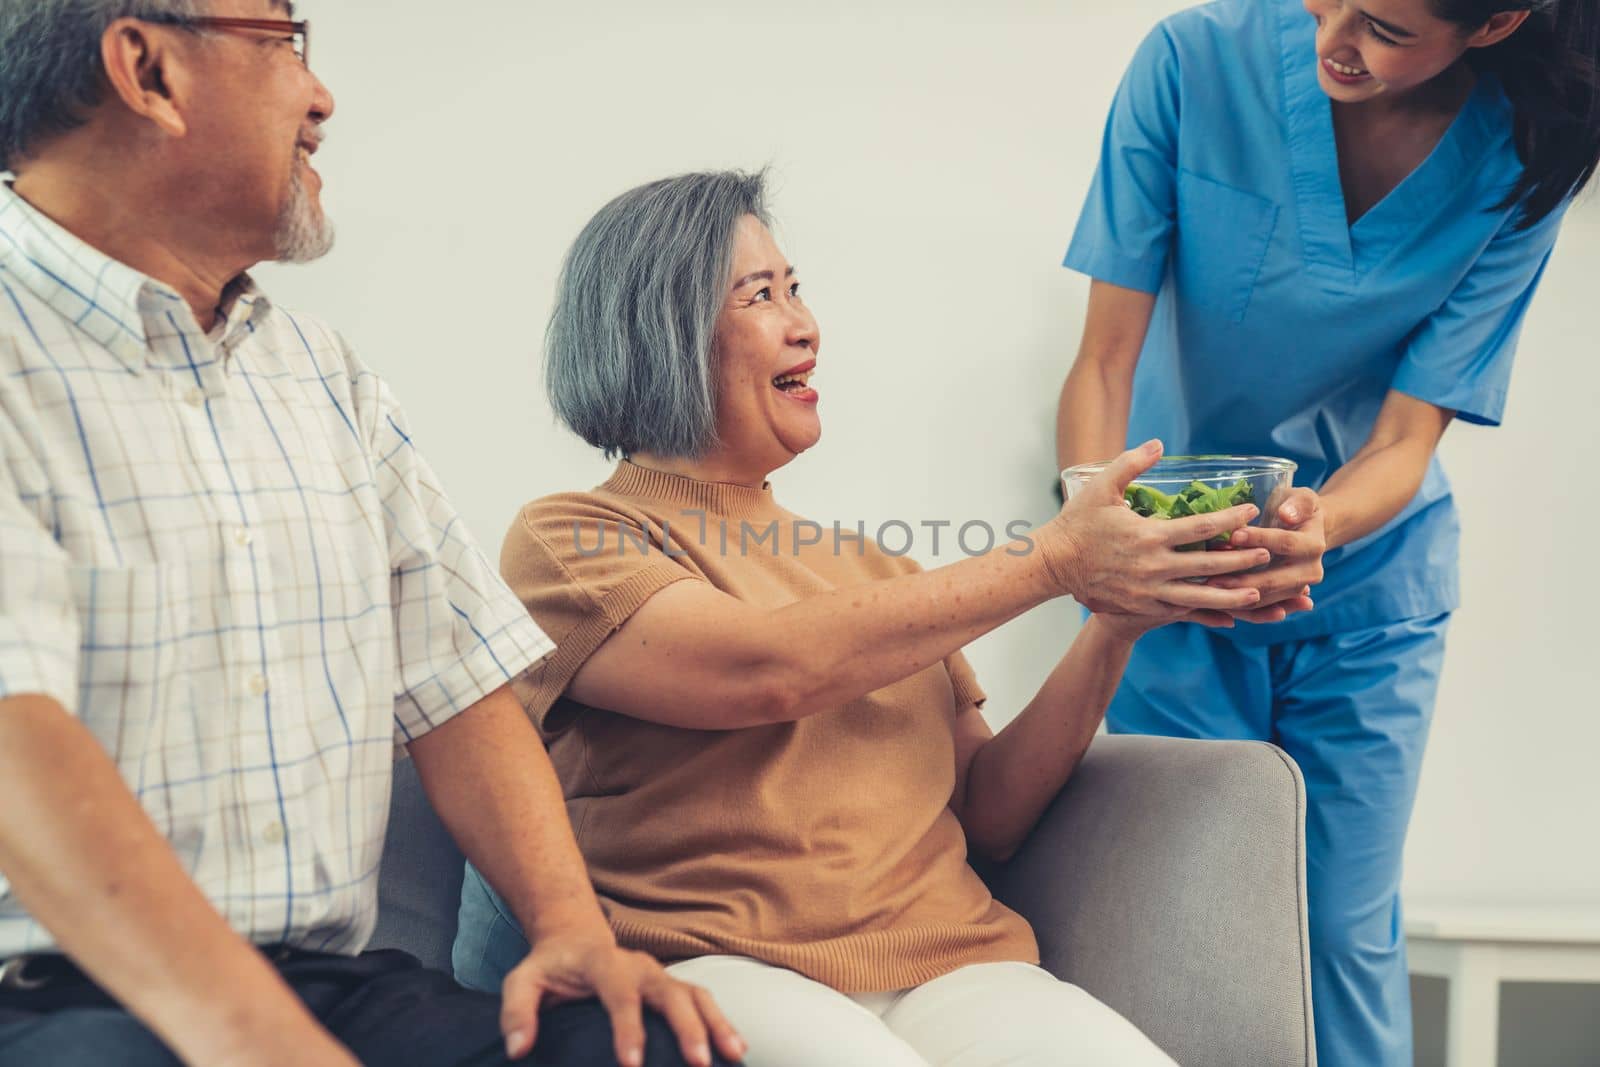 A female nurse serves a bowl of salad to a contented senior couple. Health care and medical assistance for the elderly, nursing home for pensioners.